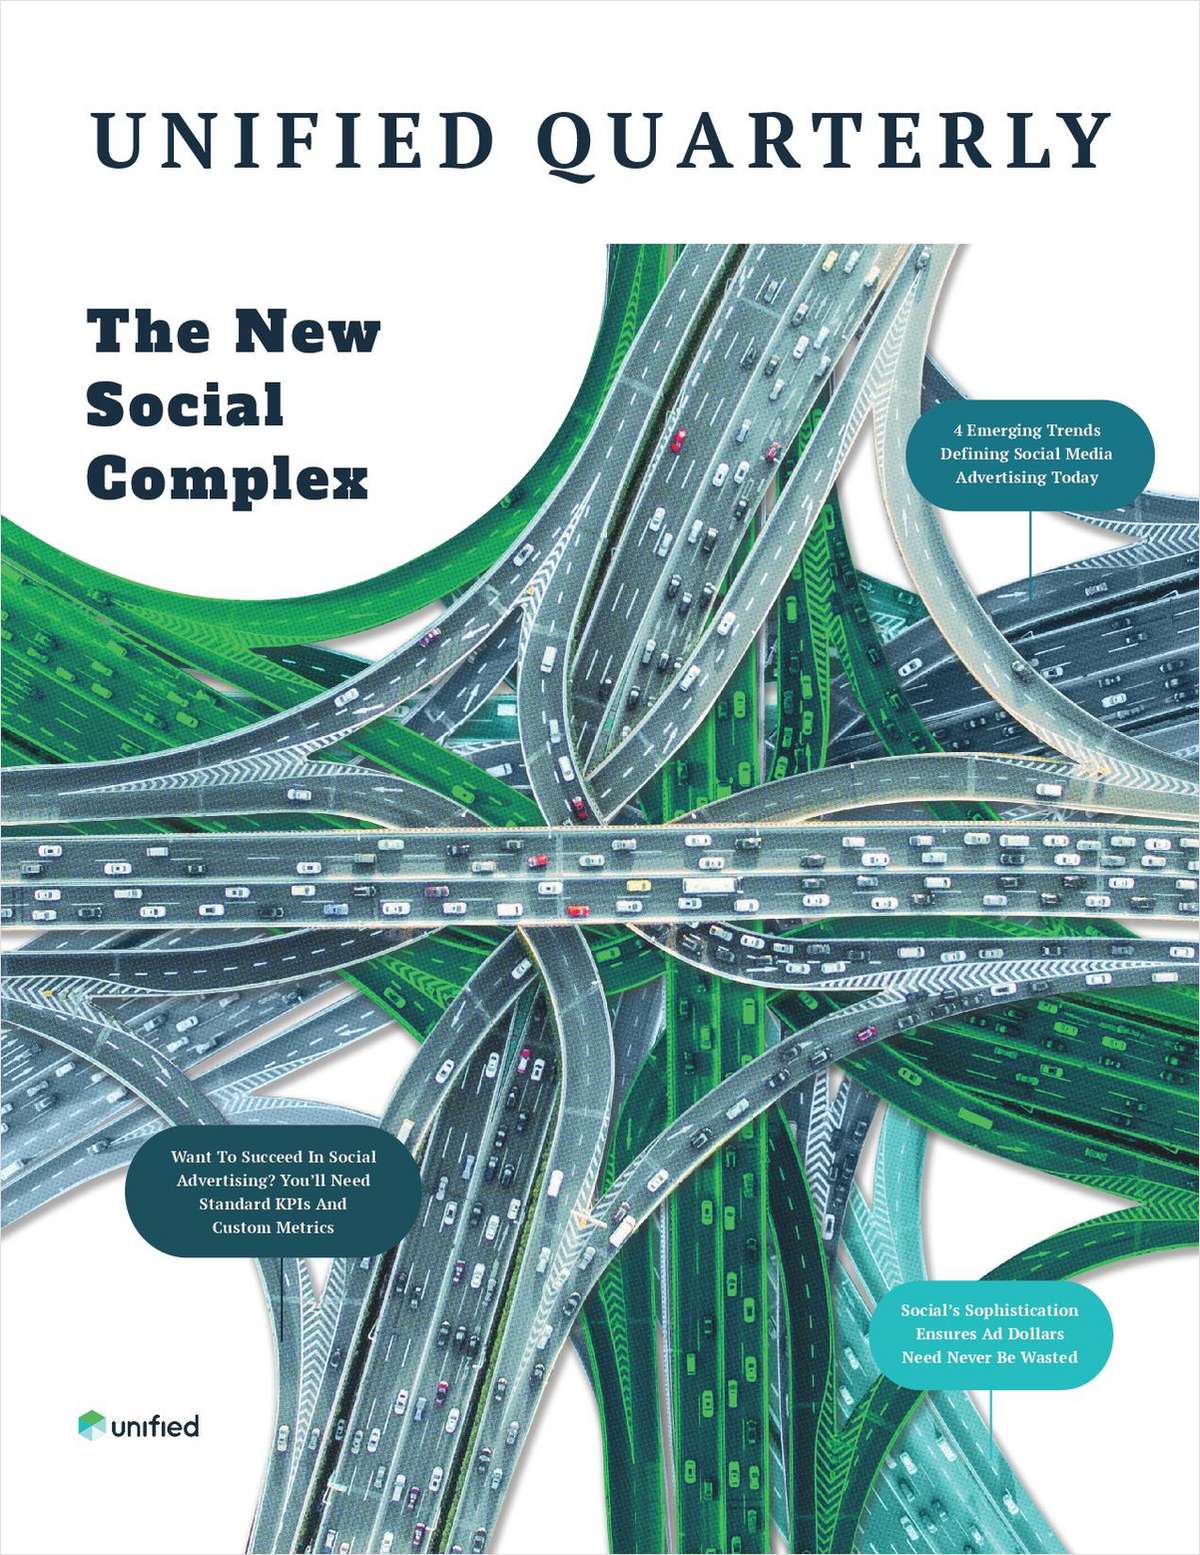 Unified Quarterly Magazine: The New Social Complex